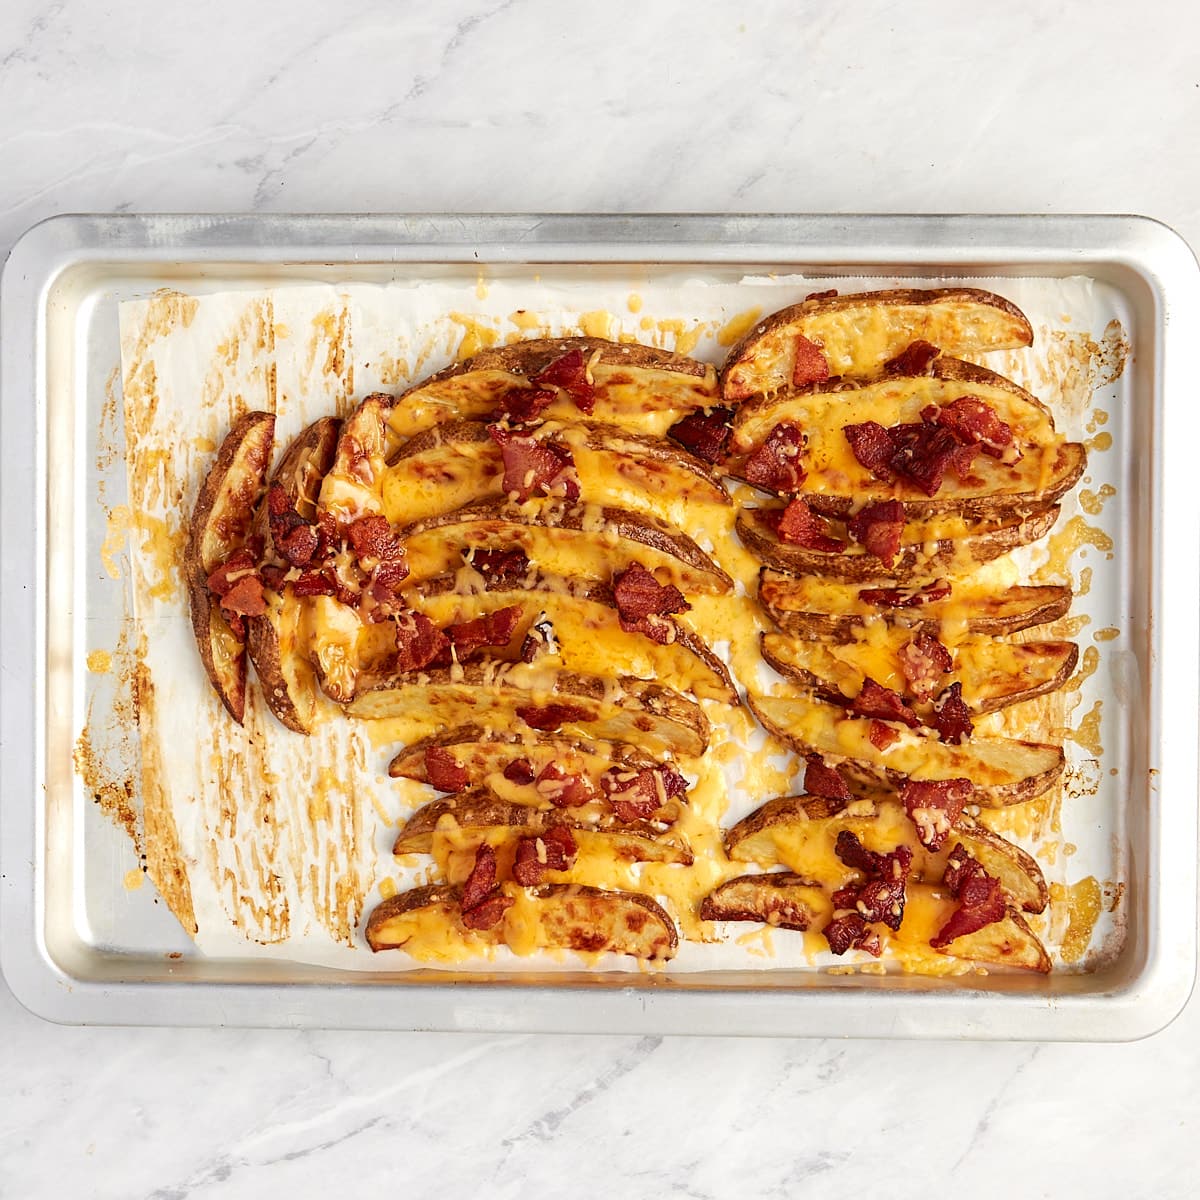 wedges on baking sheet topped with cheese and bacon after being baked.